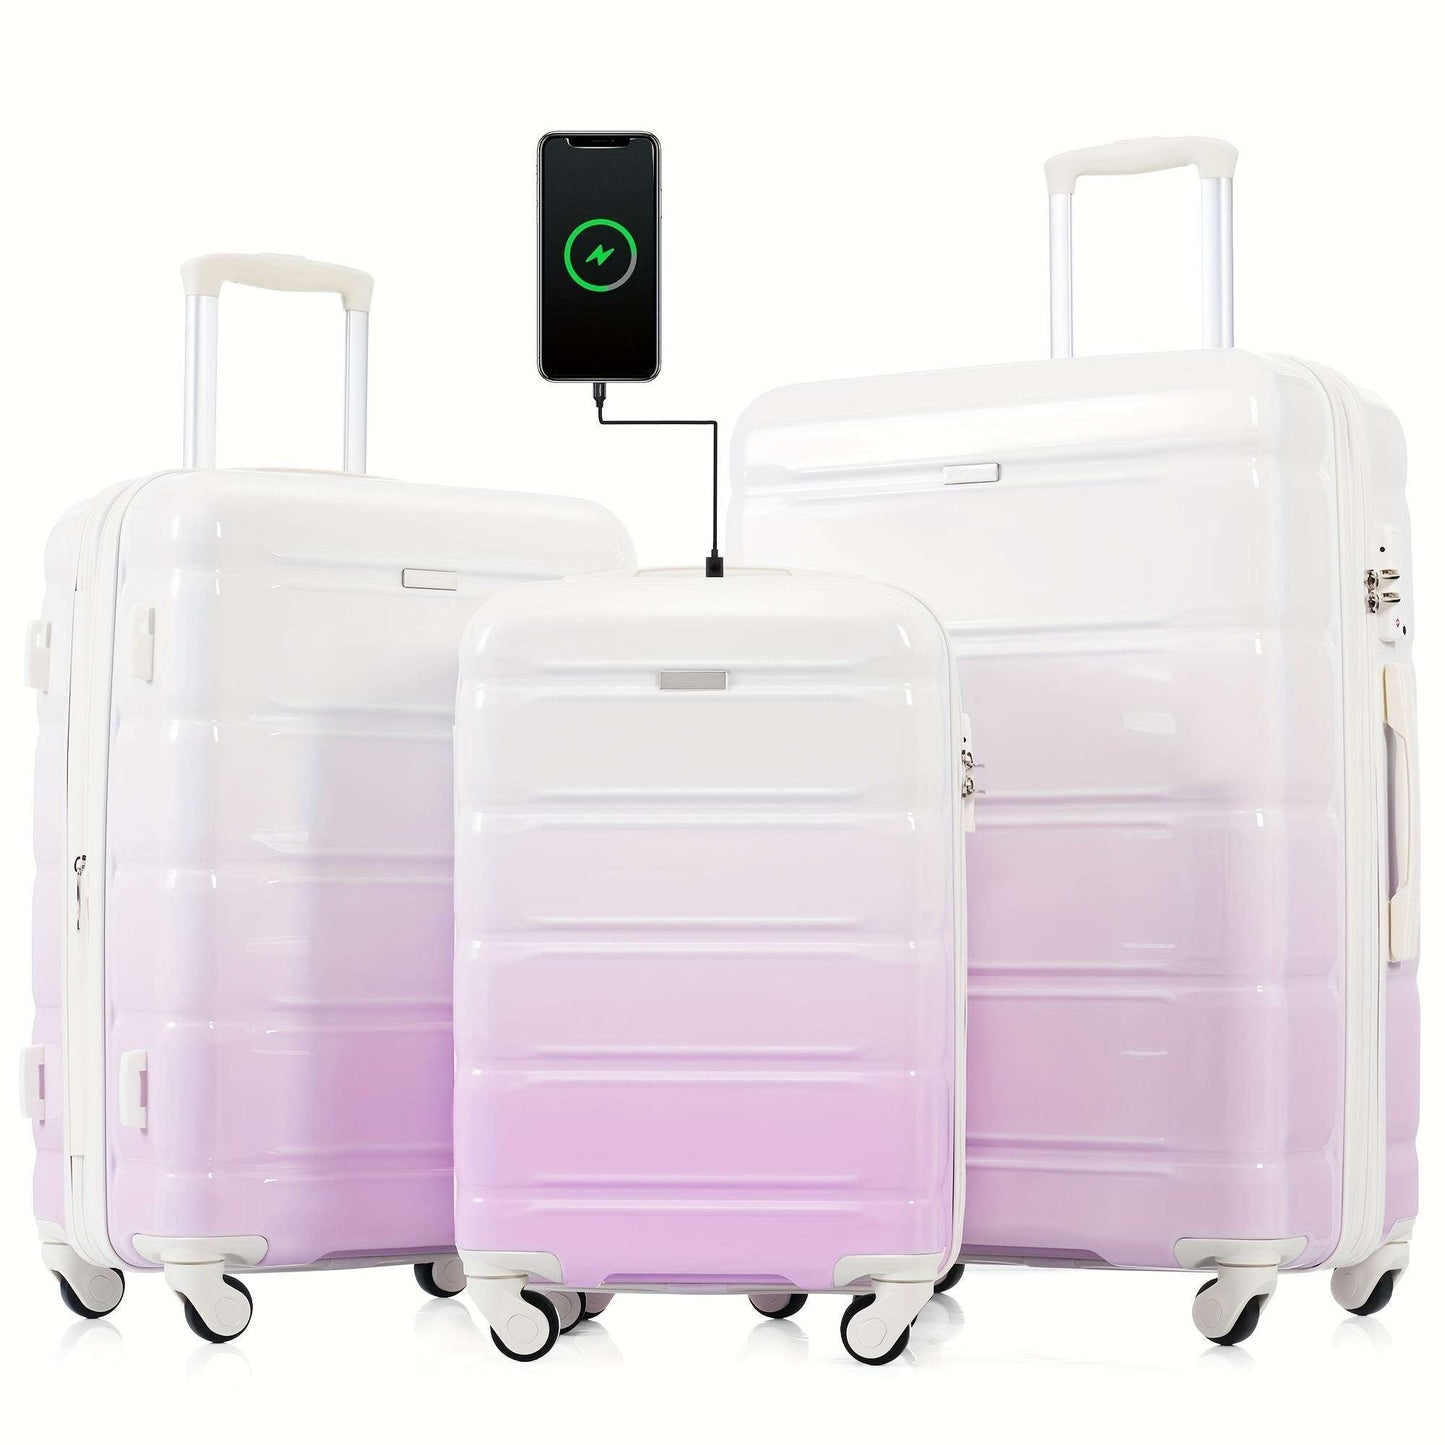 Gradient Color Luggage Set of 3, 28", 24", 20-inch with USB Port, Airline Certified Carry-on Luggage with Cup Holder 156 Luggage OK•PhotoFineArt OK•PhotoFineArt